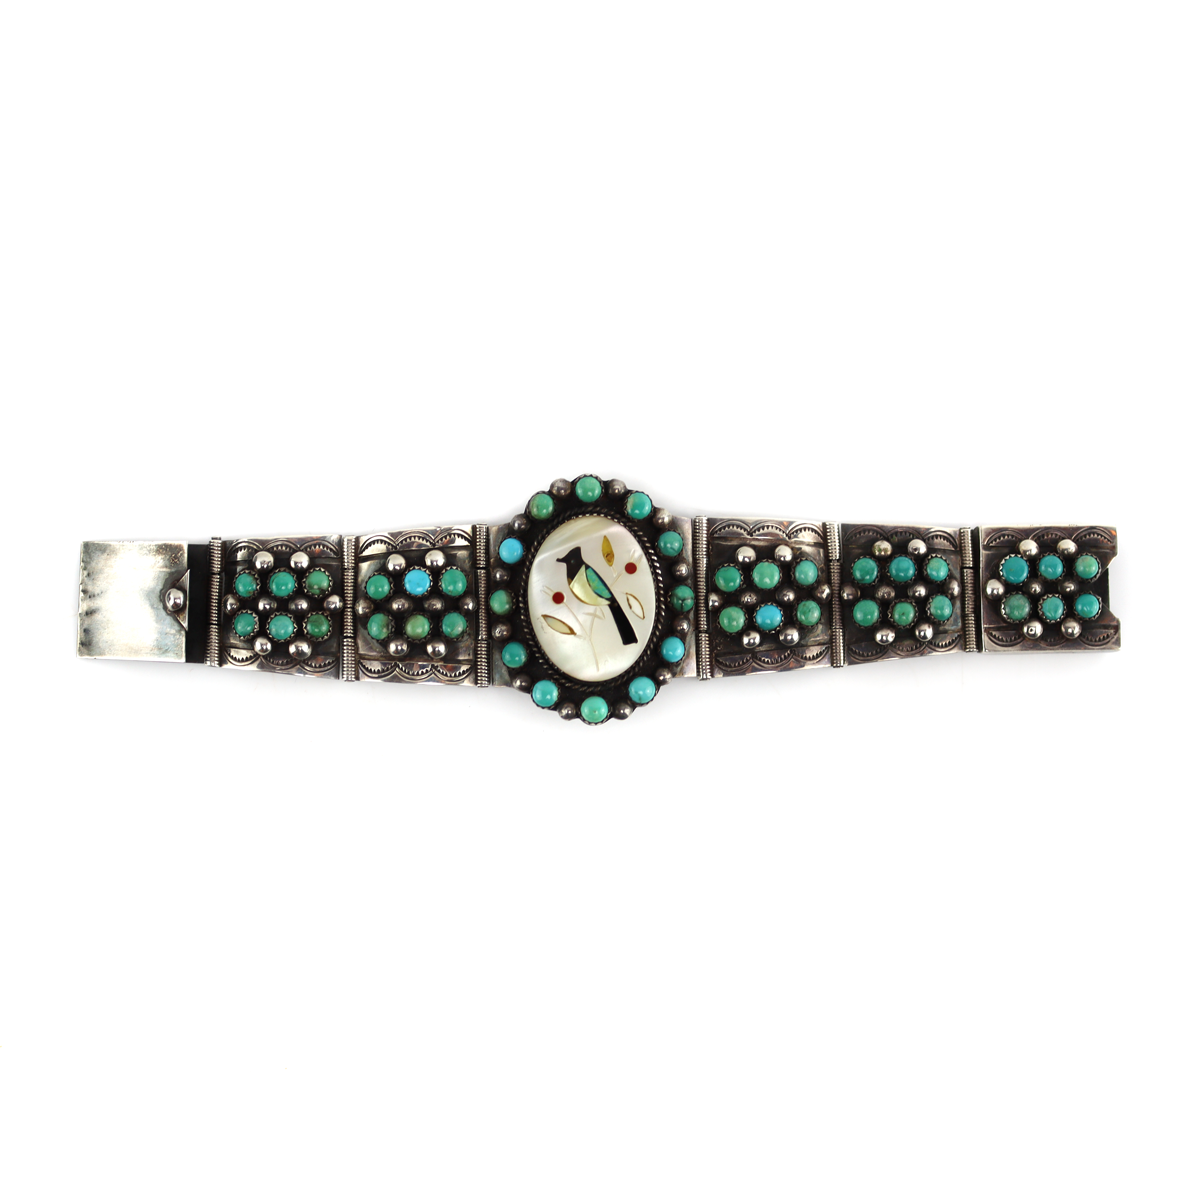 Zuni - Multi-Stone Inlay, Turquoise Cluster, and Silver Link Bracelet with Bird Design c. 1976, size 6.5 (J15963)